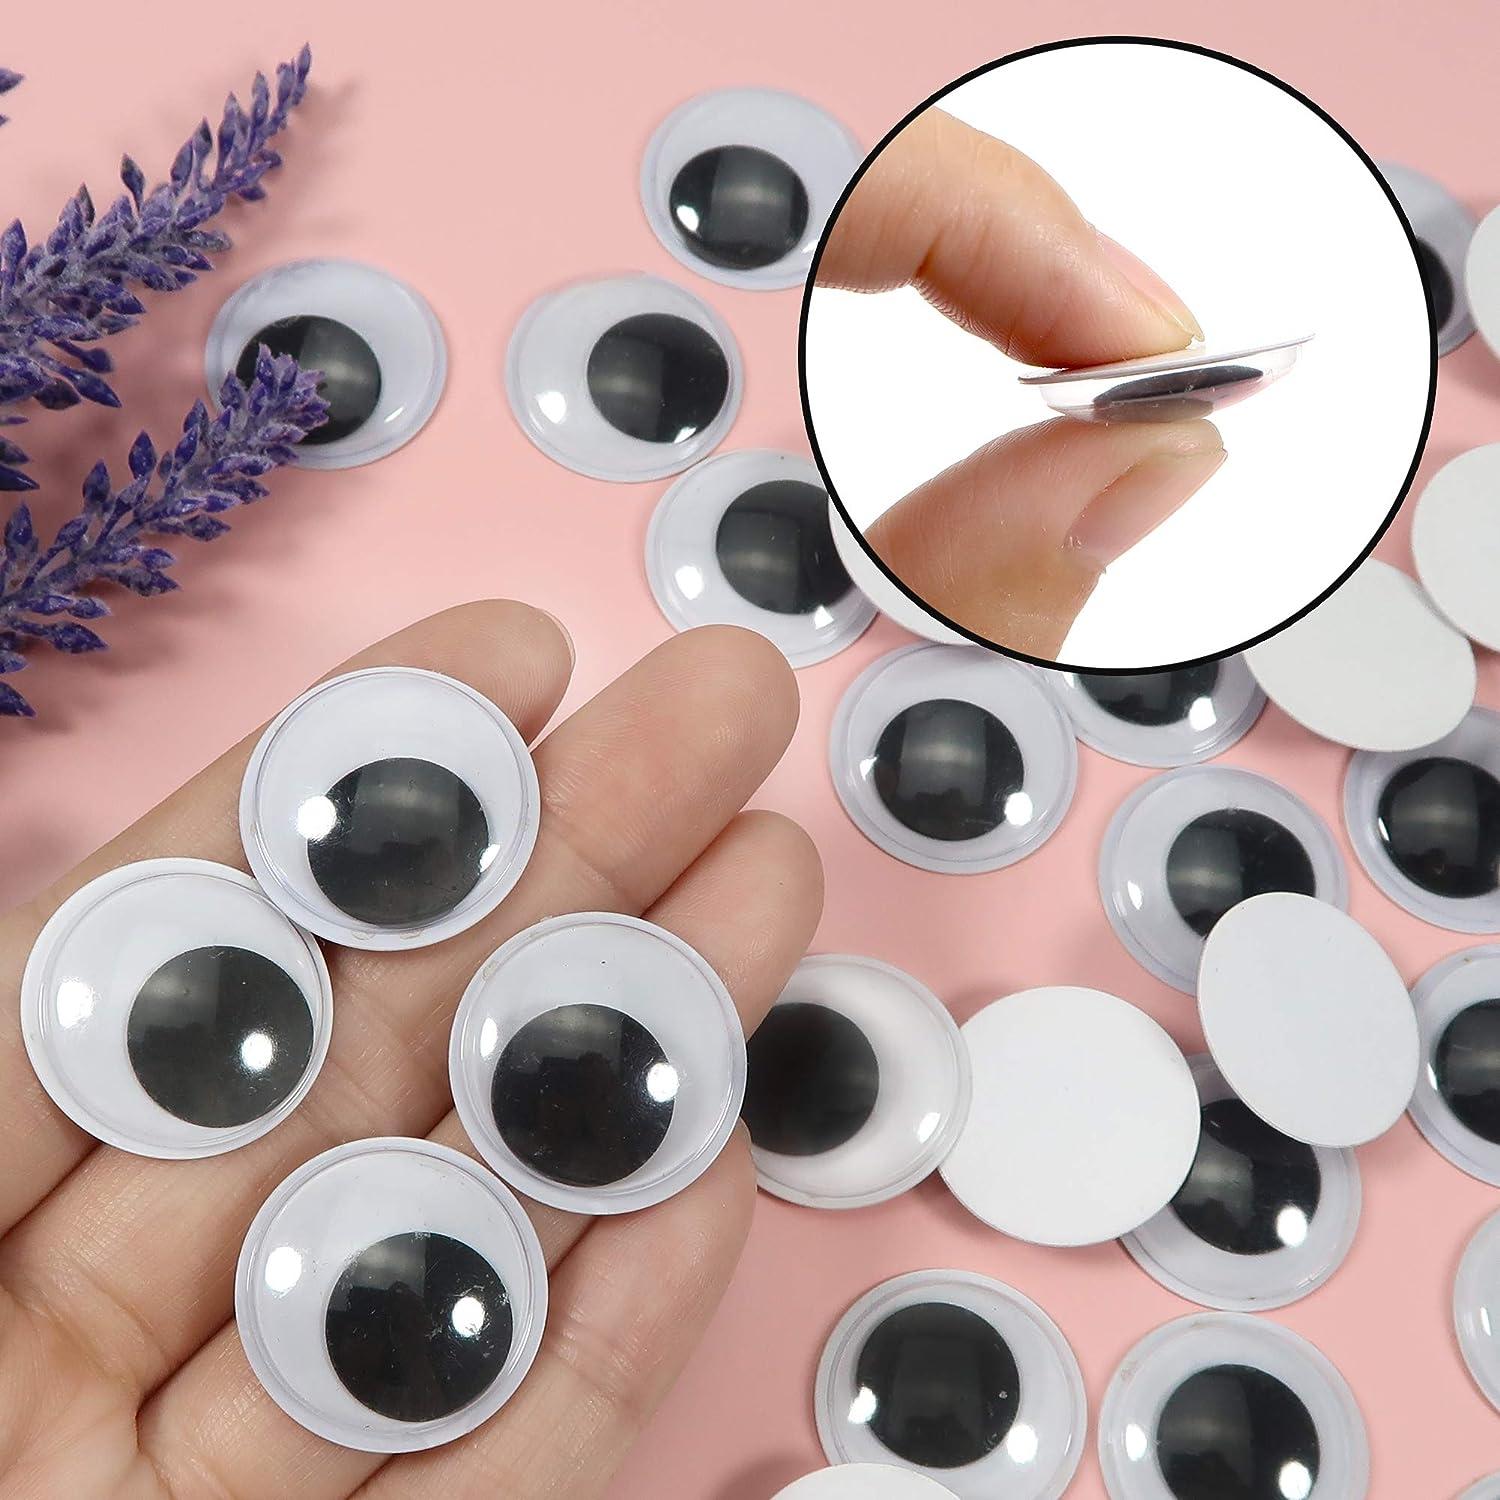  TOAOB 150pcs 6mm Plastic Wiggle Googly Eyes Self Adhesive Black  Round Sticker Eyes DIY Arts Crafts Scrapbooking Accessories : Arts, Crafts  & Sewing